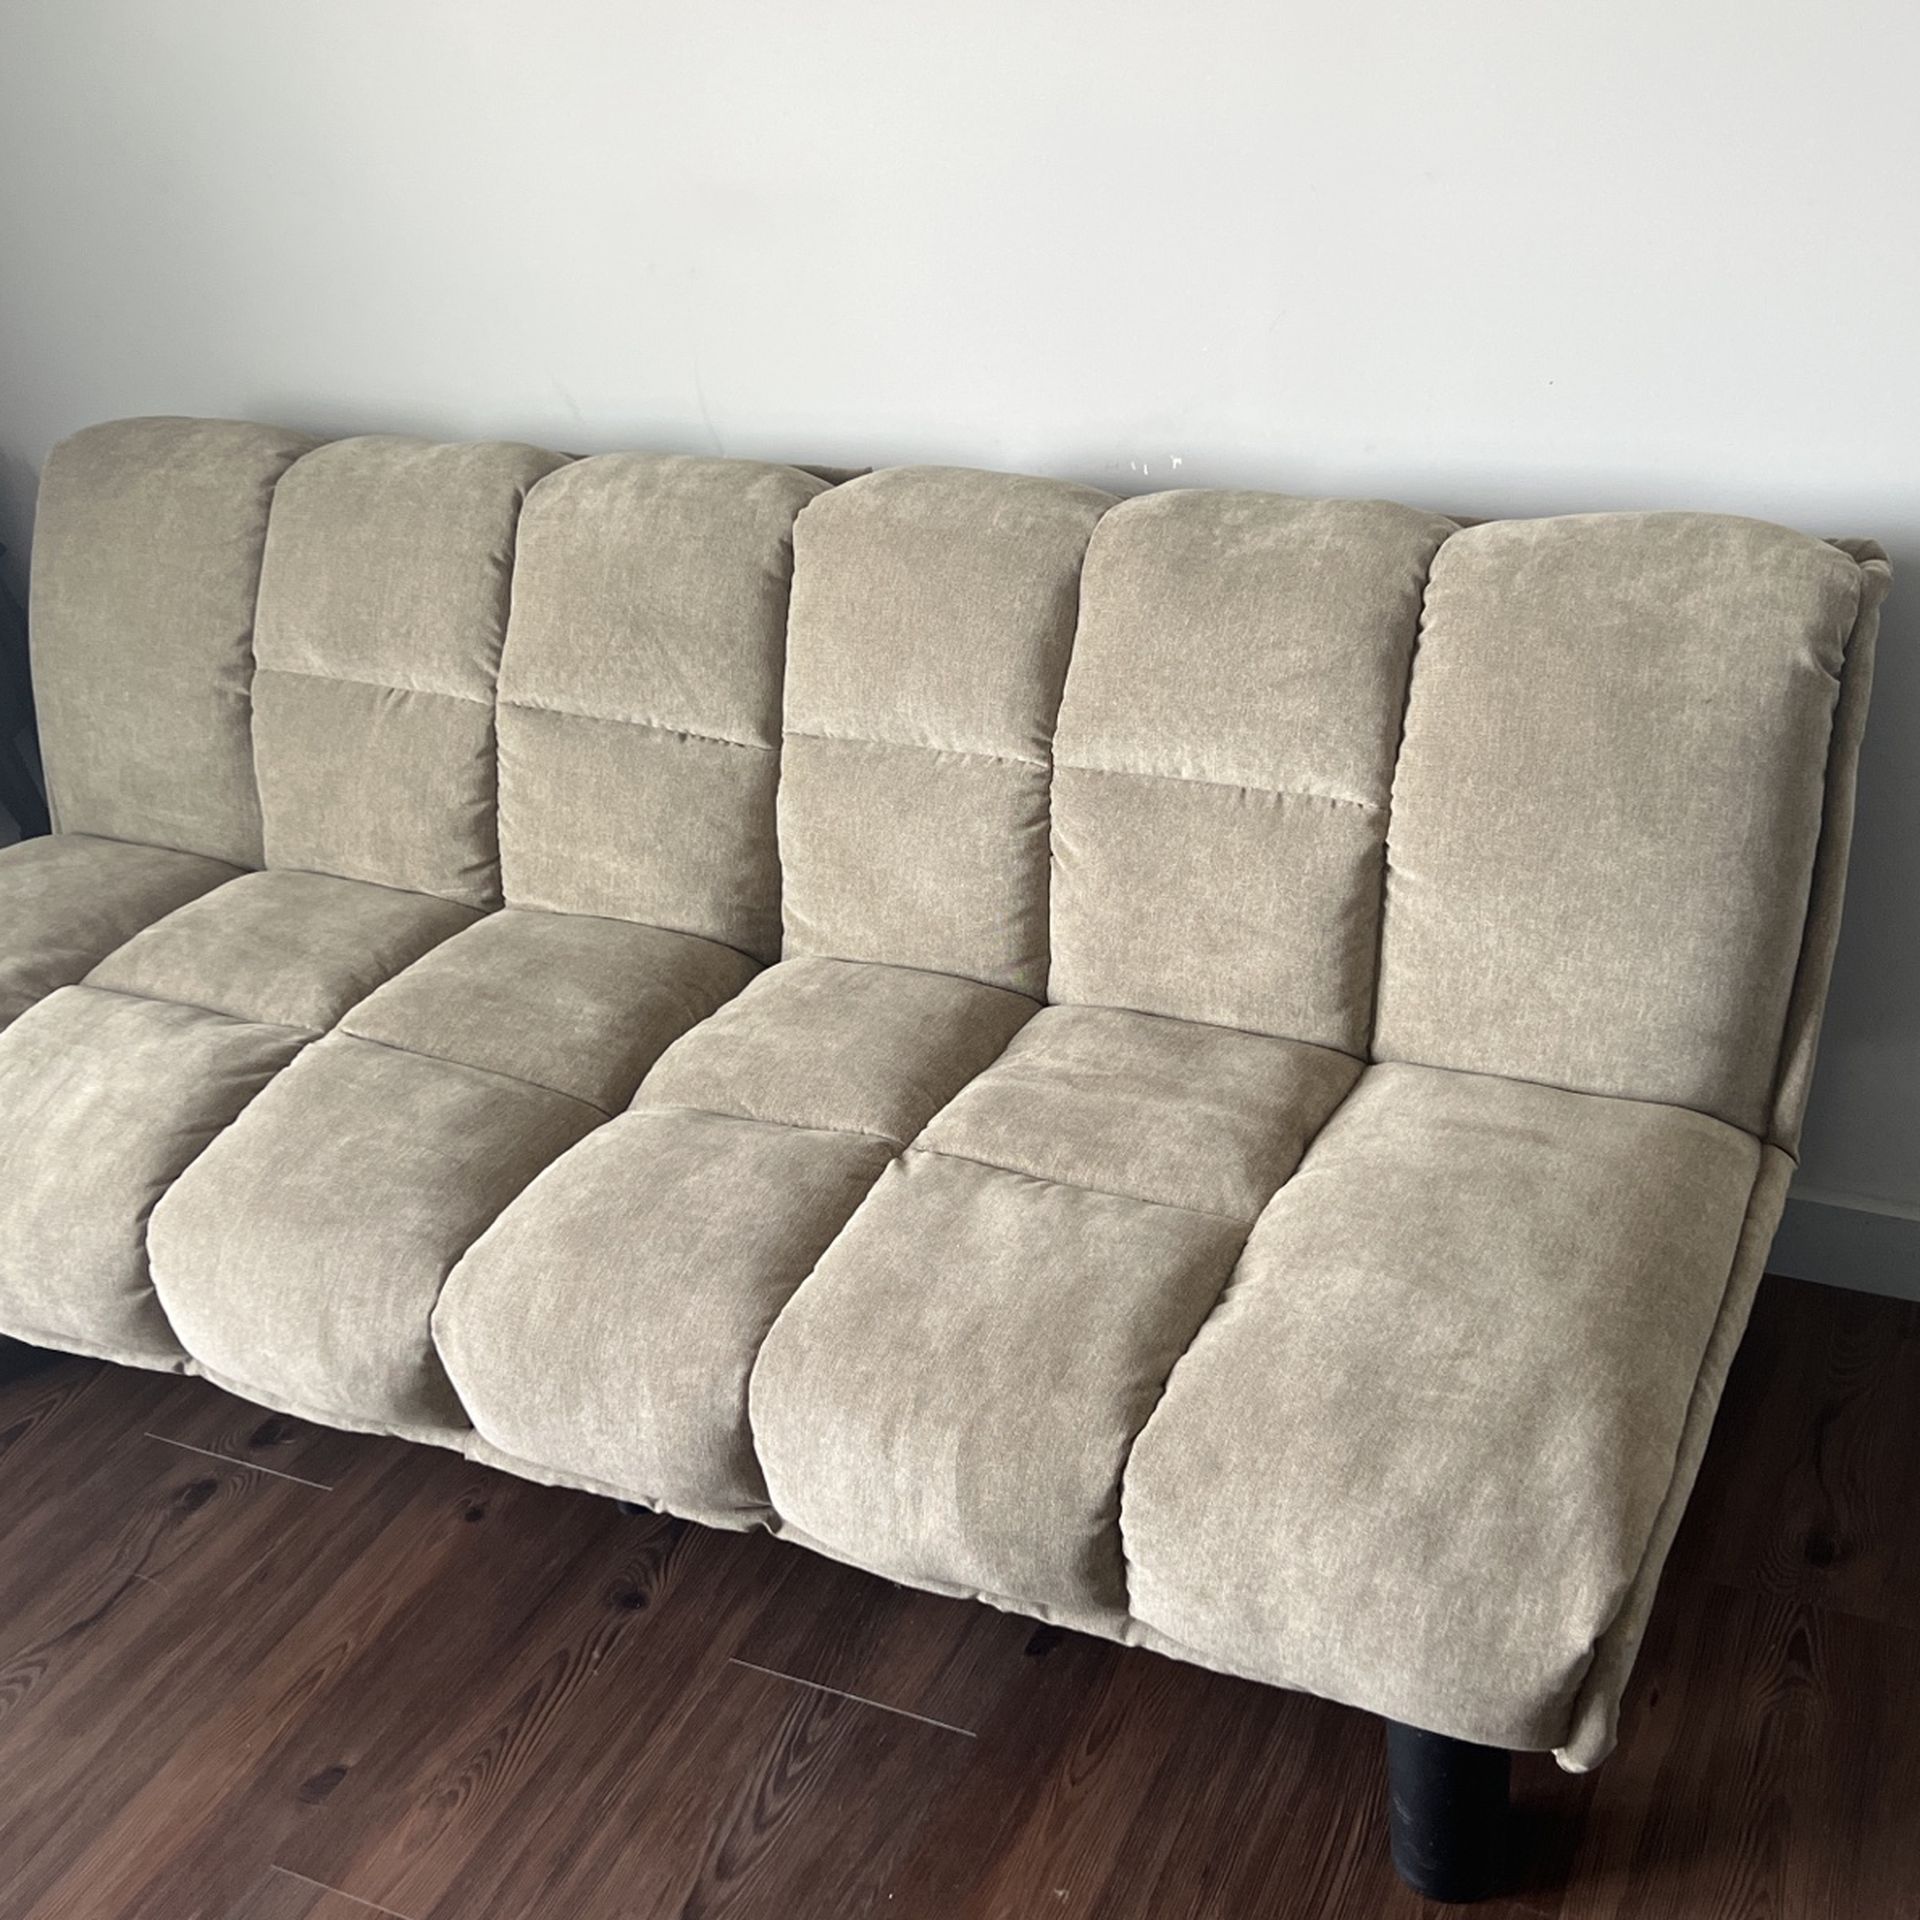 Futon For Sell 